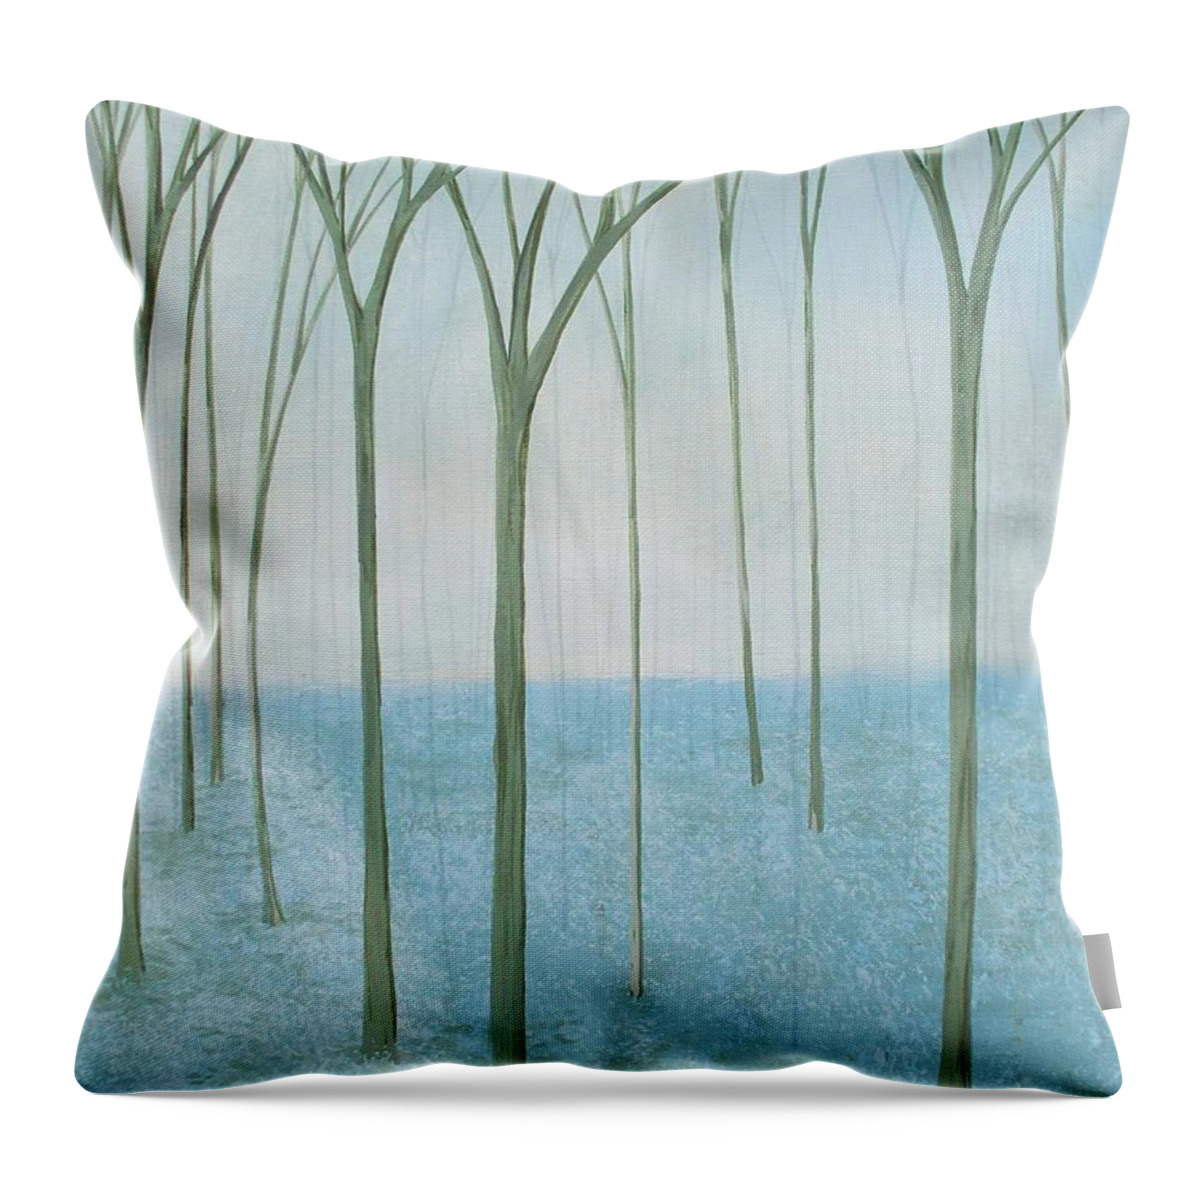 Abstract Throw Pillow featuring the painting Forest Delight II by Herb Dickinson